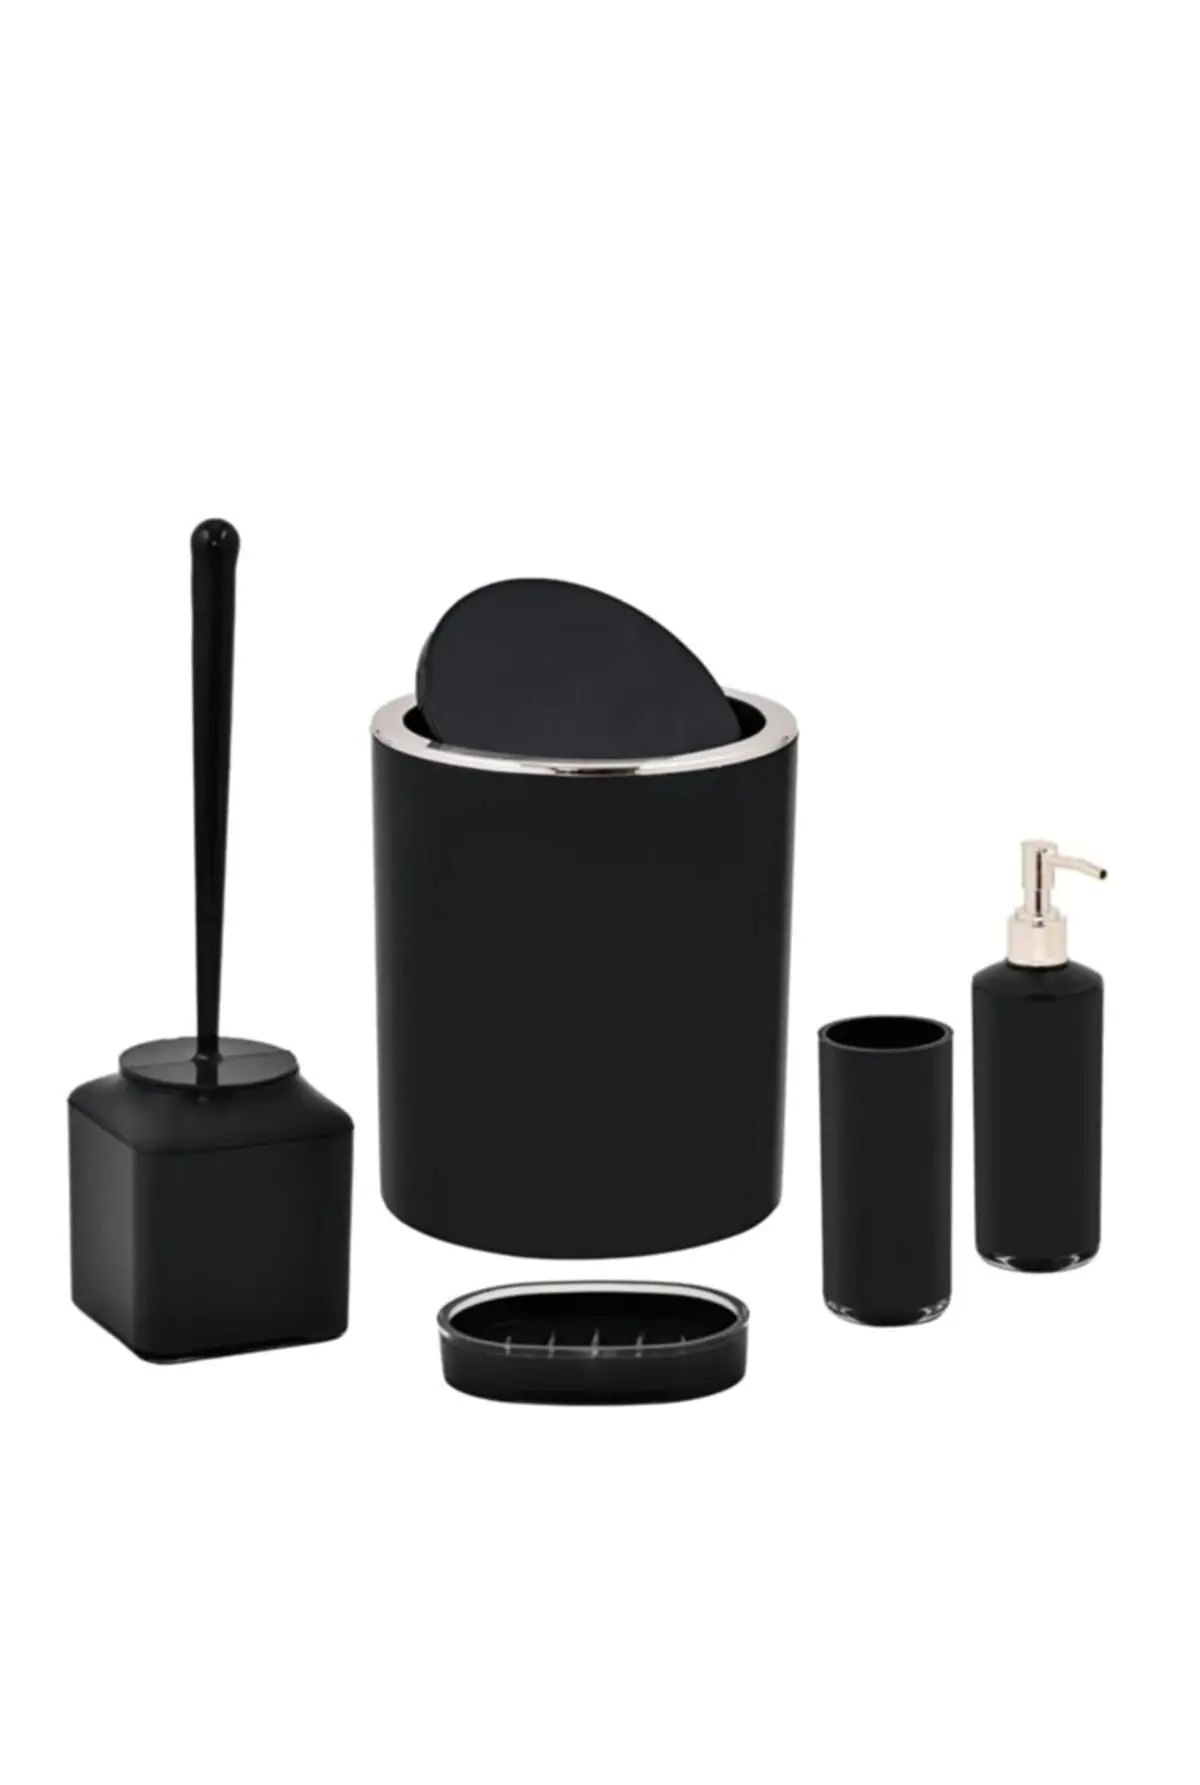 Bathroom Accessory Set Black Silver 5 Pcs Acrylic Lux Toothbrush Holder Liquid And Solid Soap Dispenser Toilet Brush Trash Can